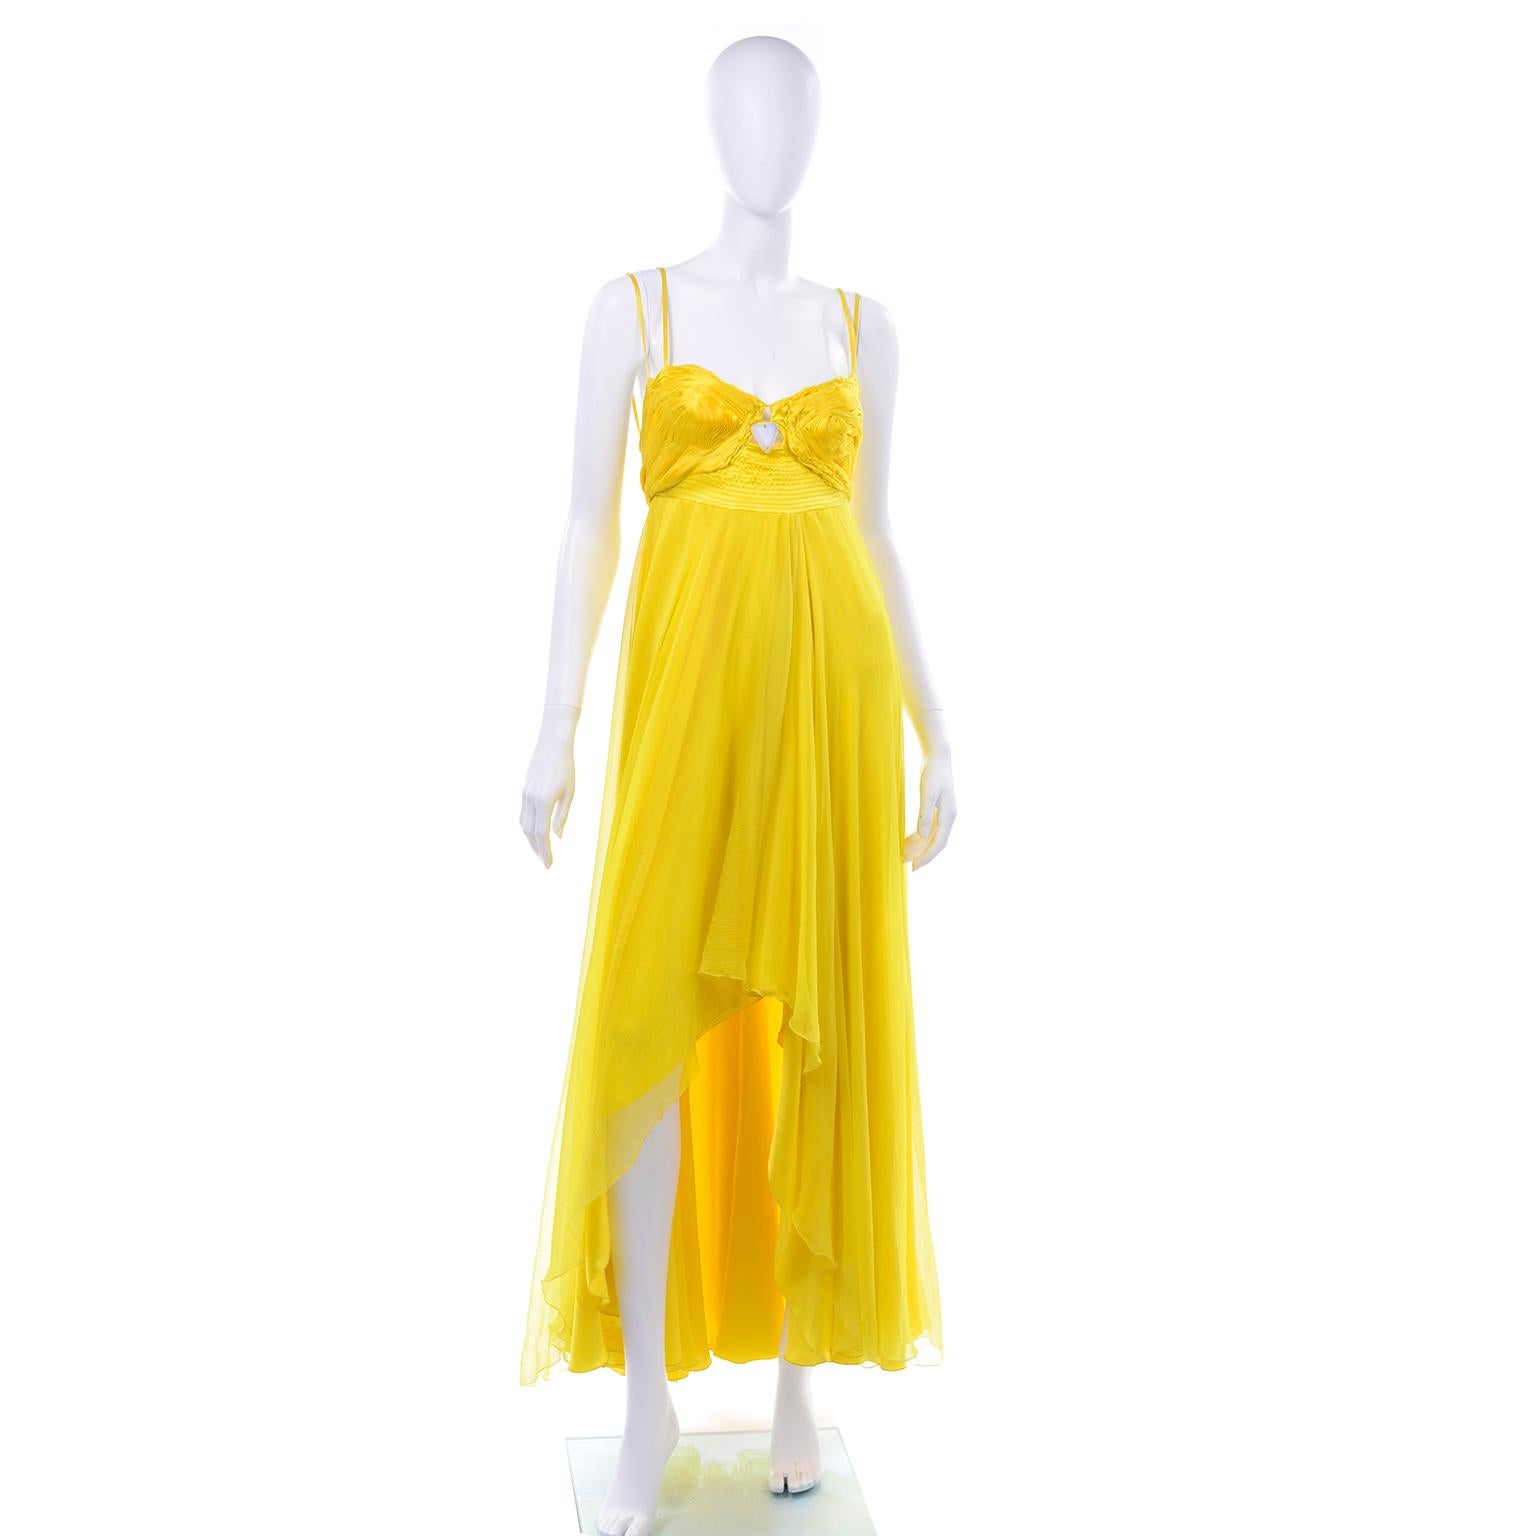 This is an incredible Italian yellow silk high low dress with soutache bust detail from Gattinoni. We love the beautiful textures and different silks used for this dress. This has an empire style waistband and the cups of this dress are lined with a